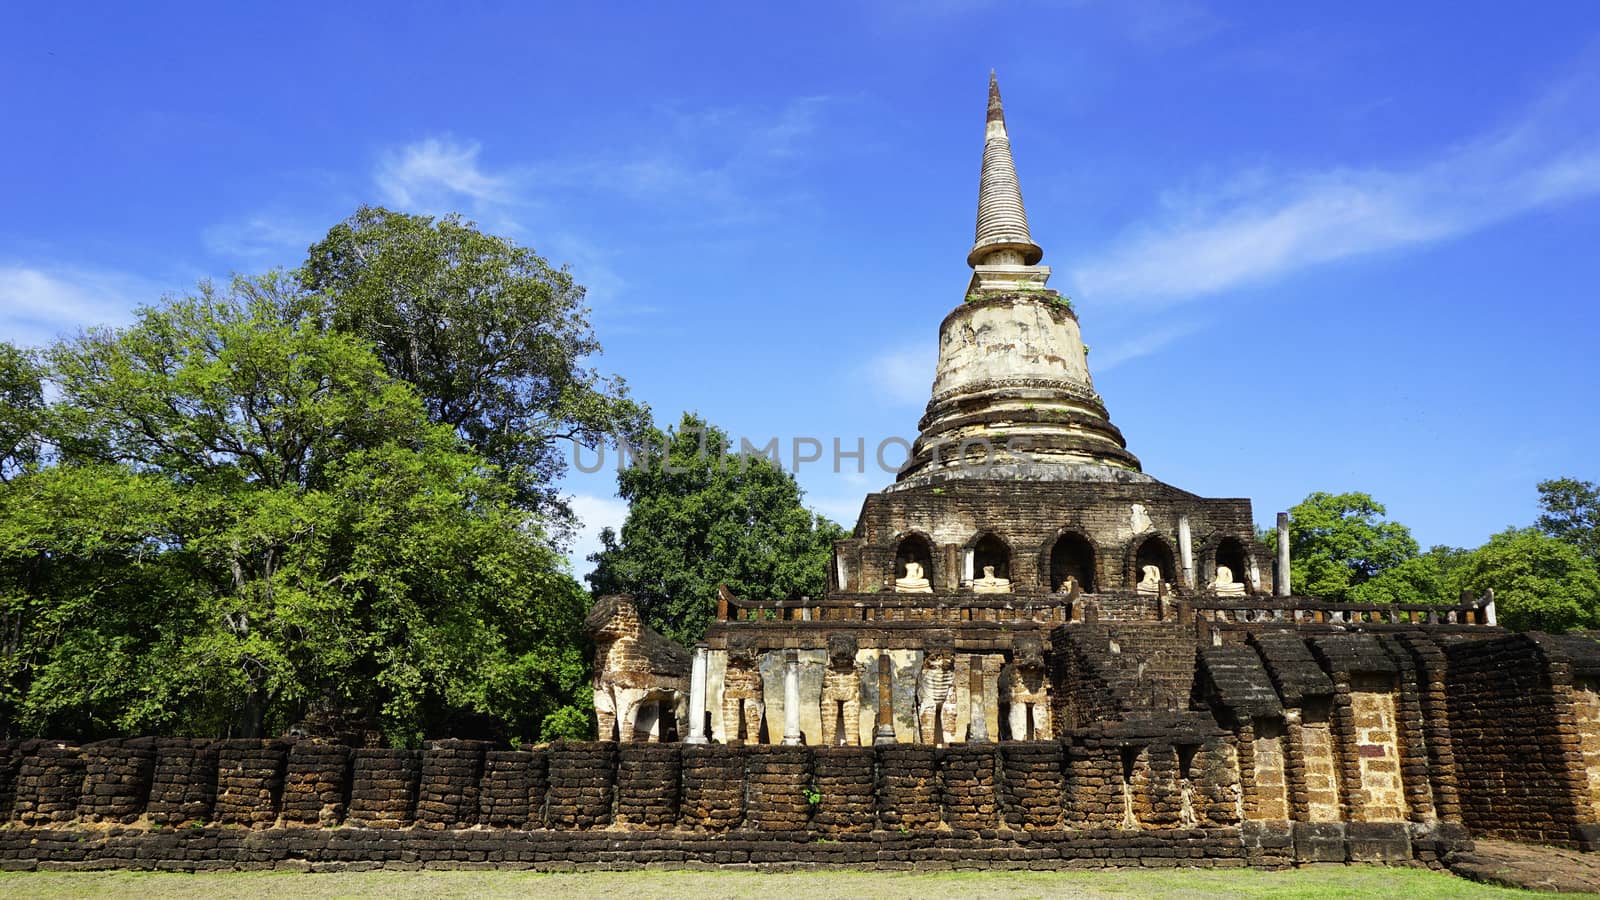 Historical Park Wat chang lom temple pagoda with fence in Sukhothai world heritage